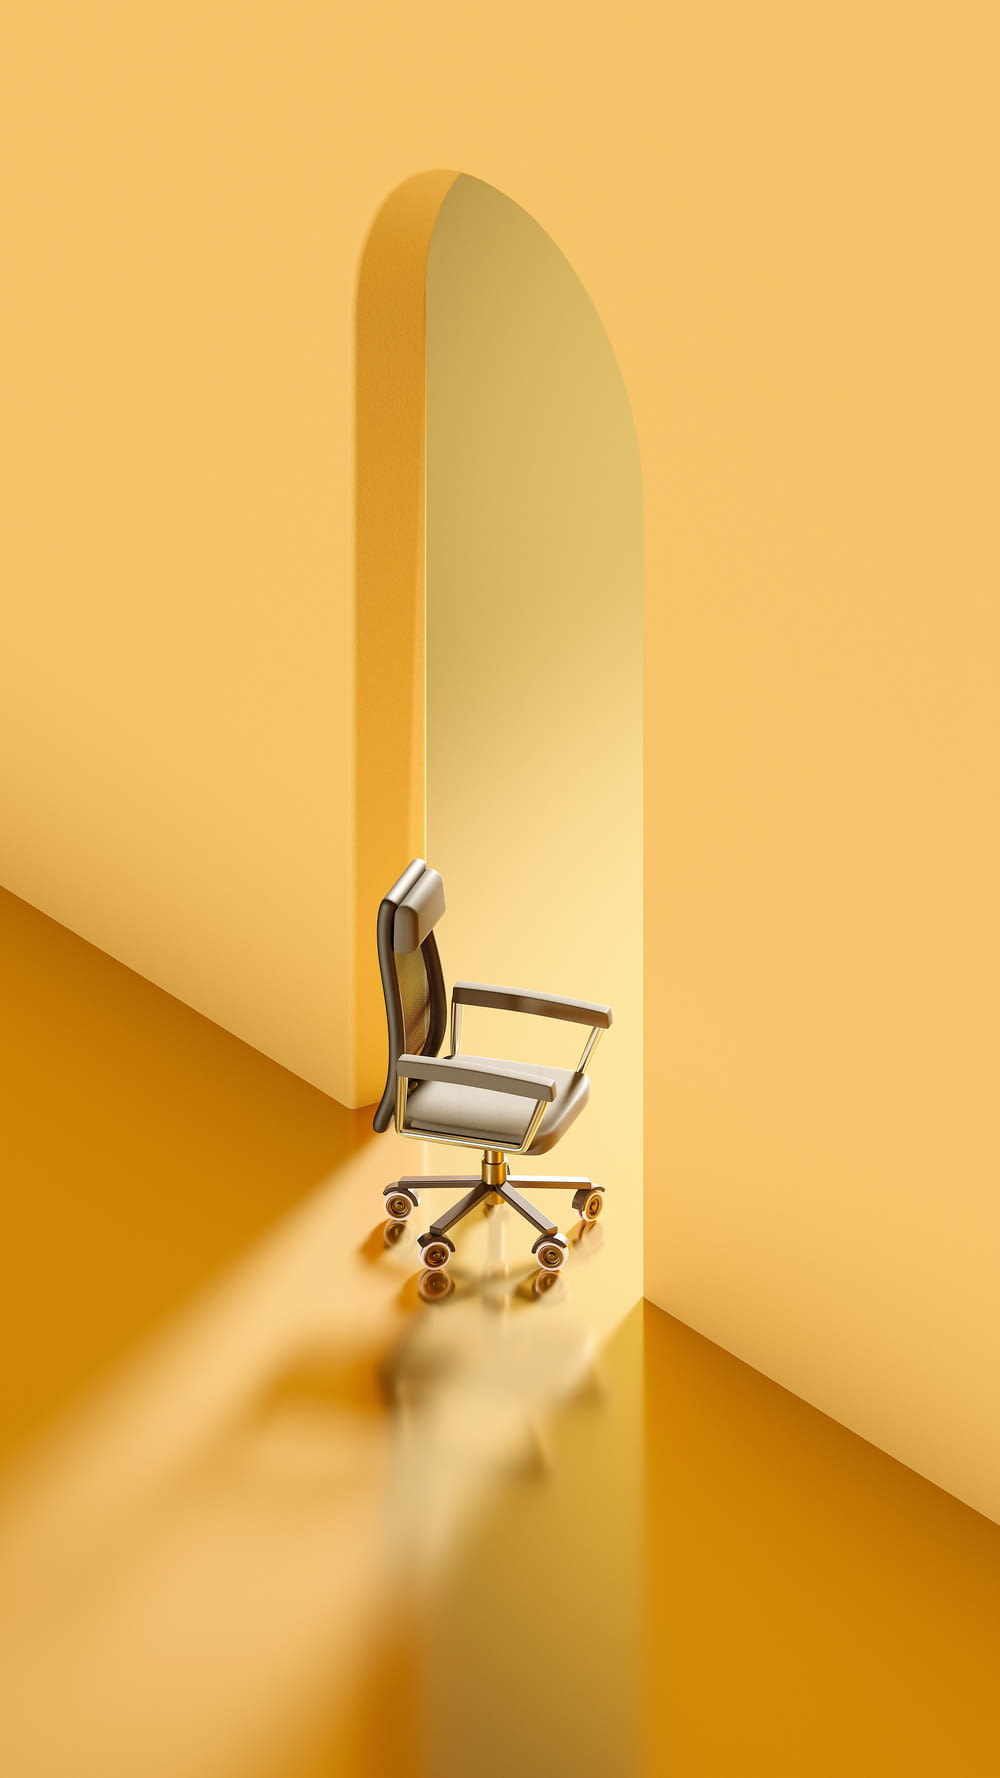 a chair sitting in front of an open door